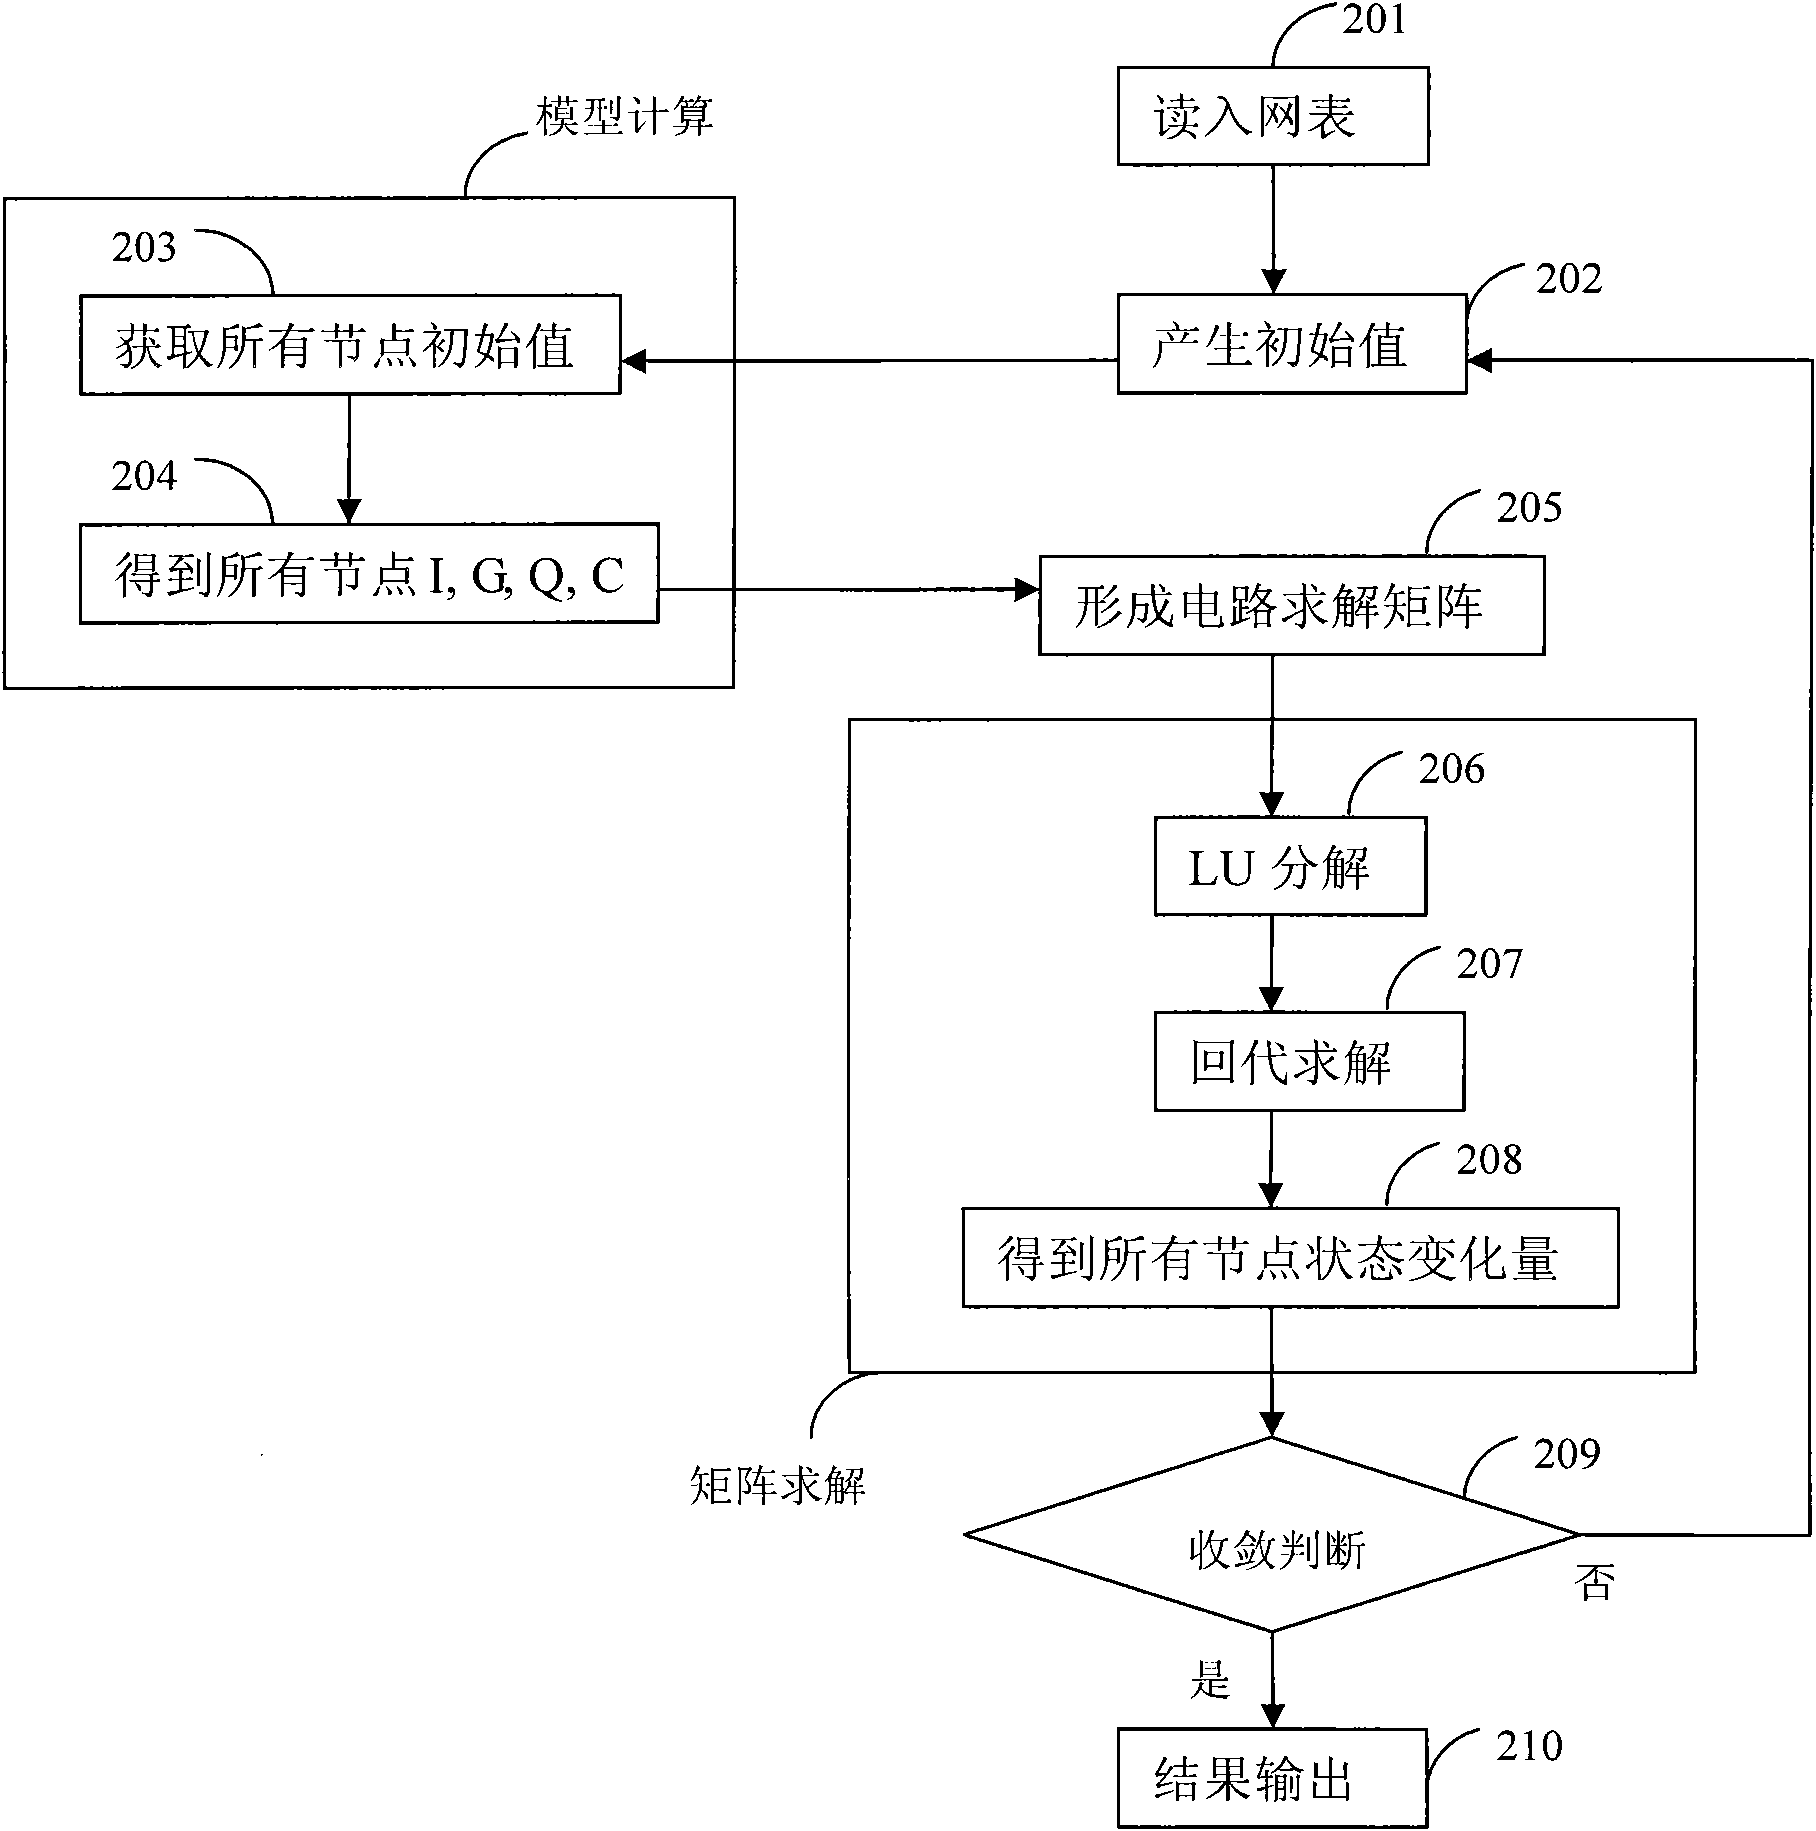 Method for eliminating internal nodes of metal-oxide-semiconductor field effect transistor (MOSFET) used in rapid circuit simulation